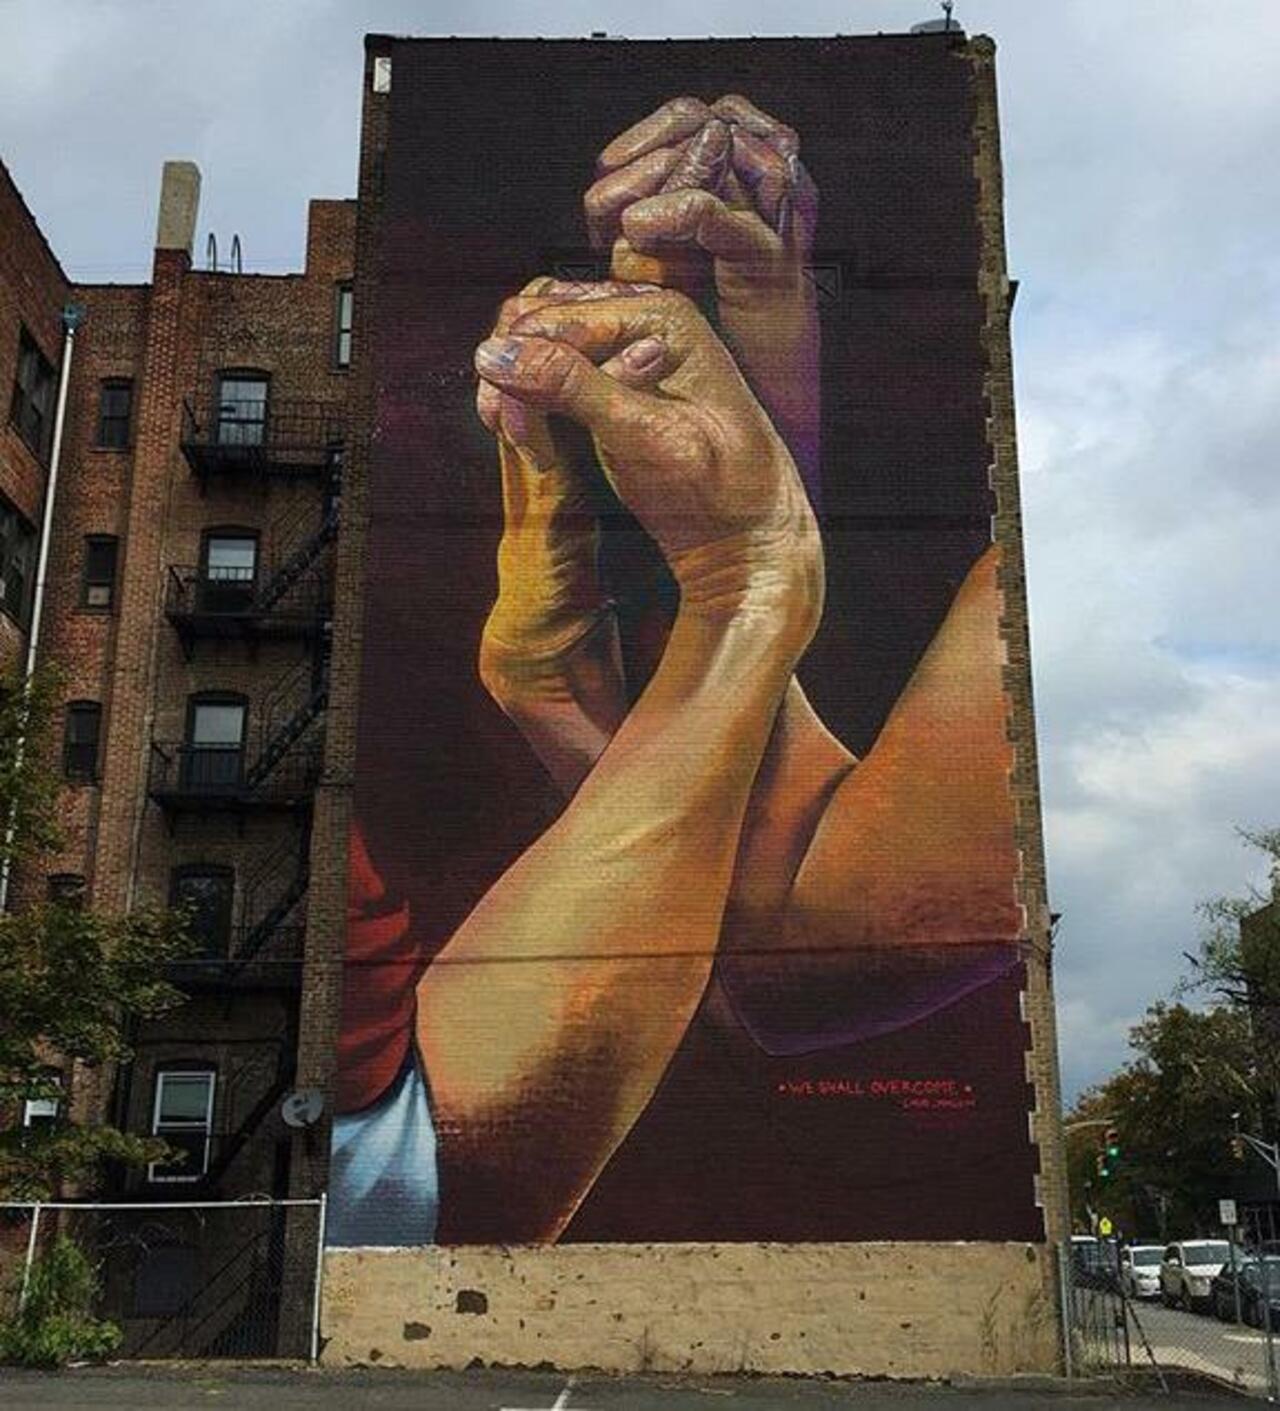 New Street Art by CaseMaclaim in Jersey City for the TheBKcollective 

#art #graffiti #mural #streetart http://t.co/irPAH9HTVC